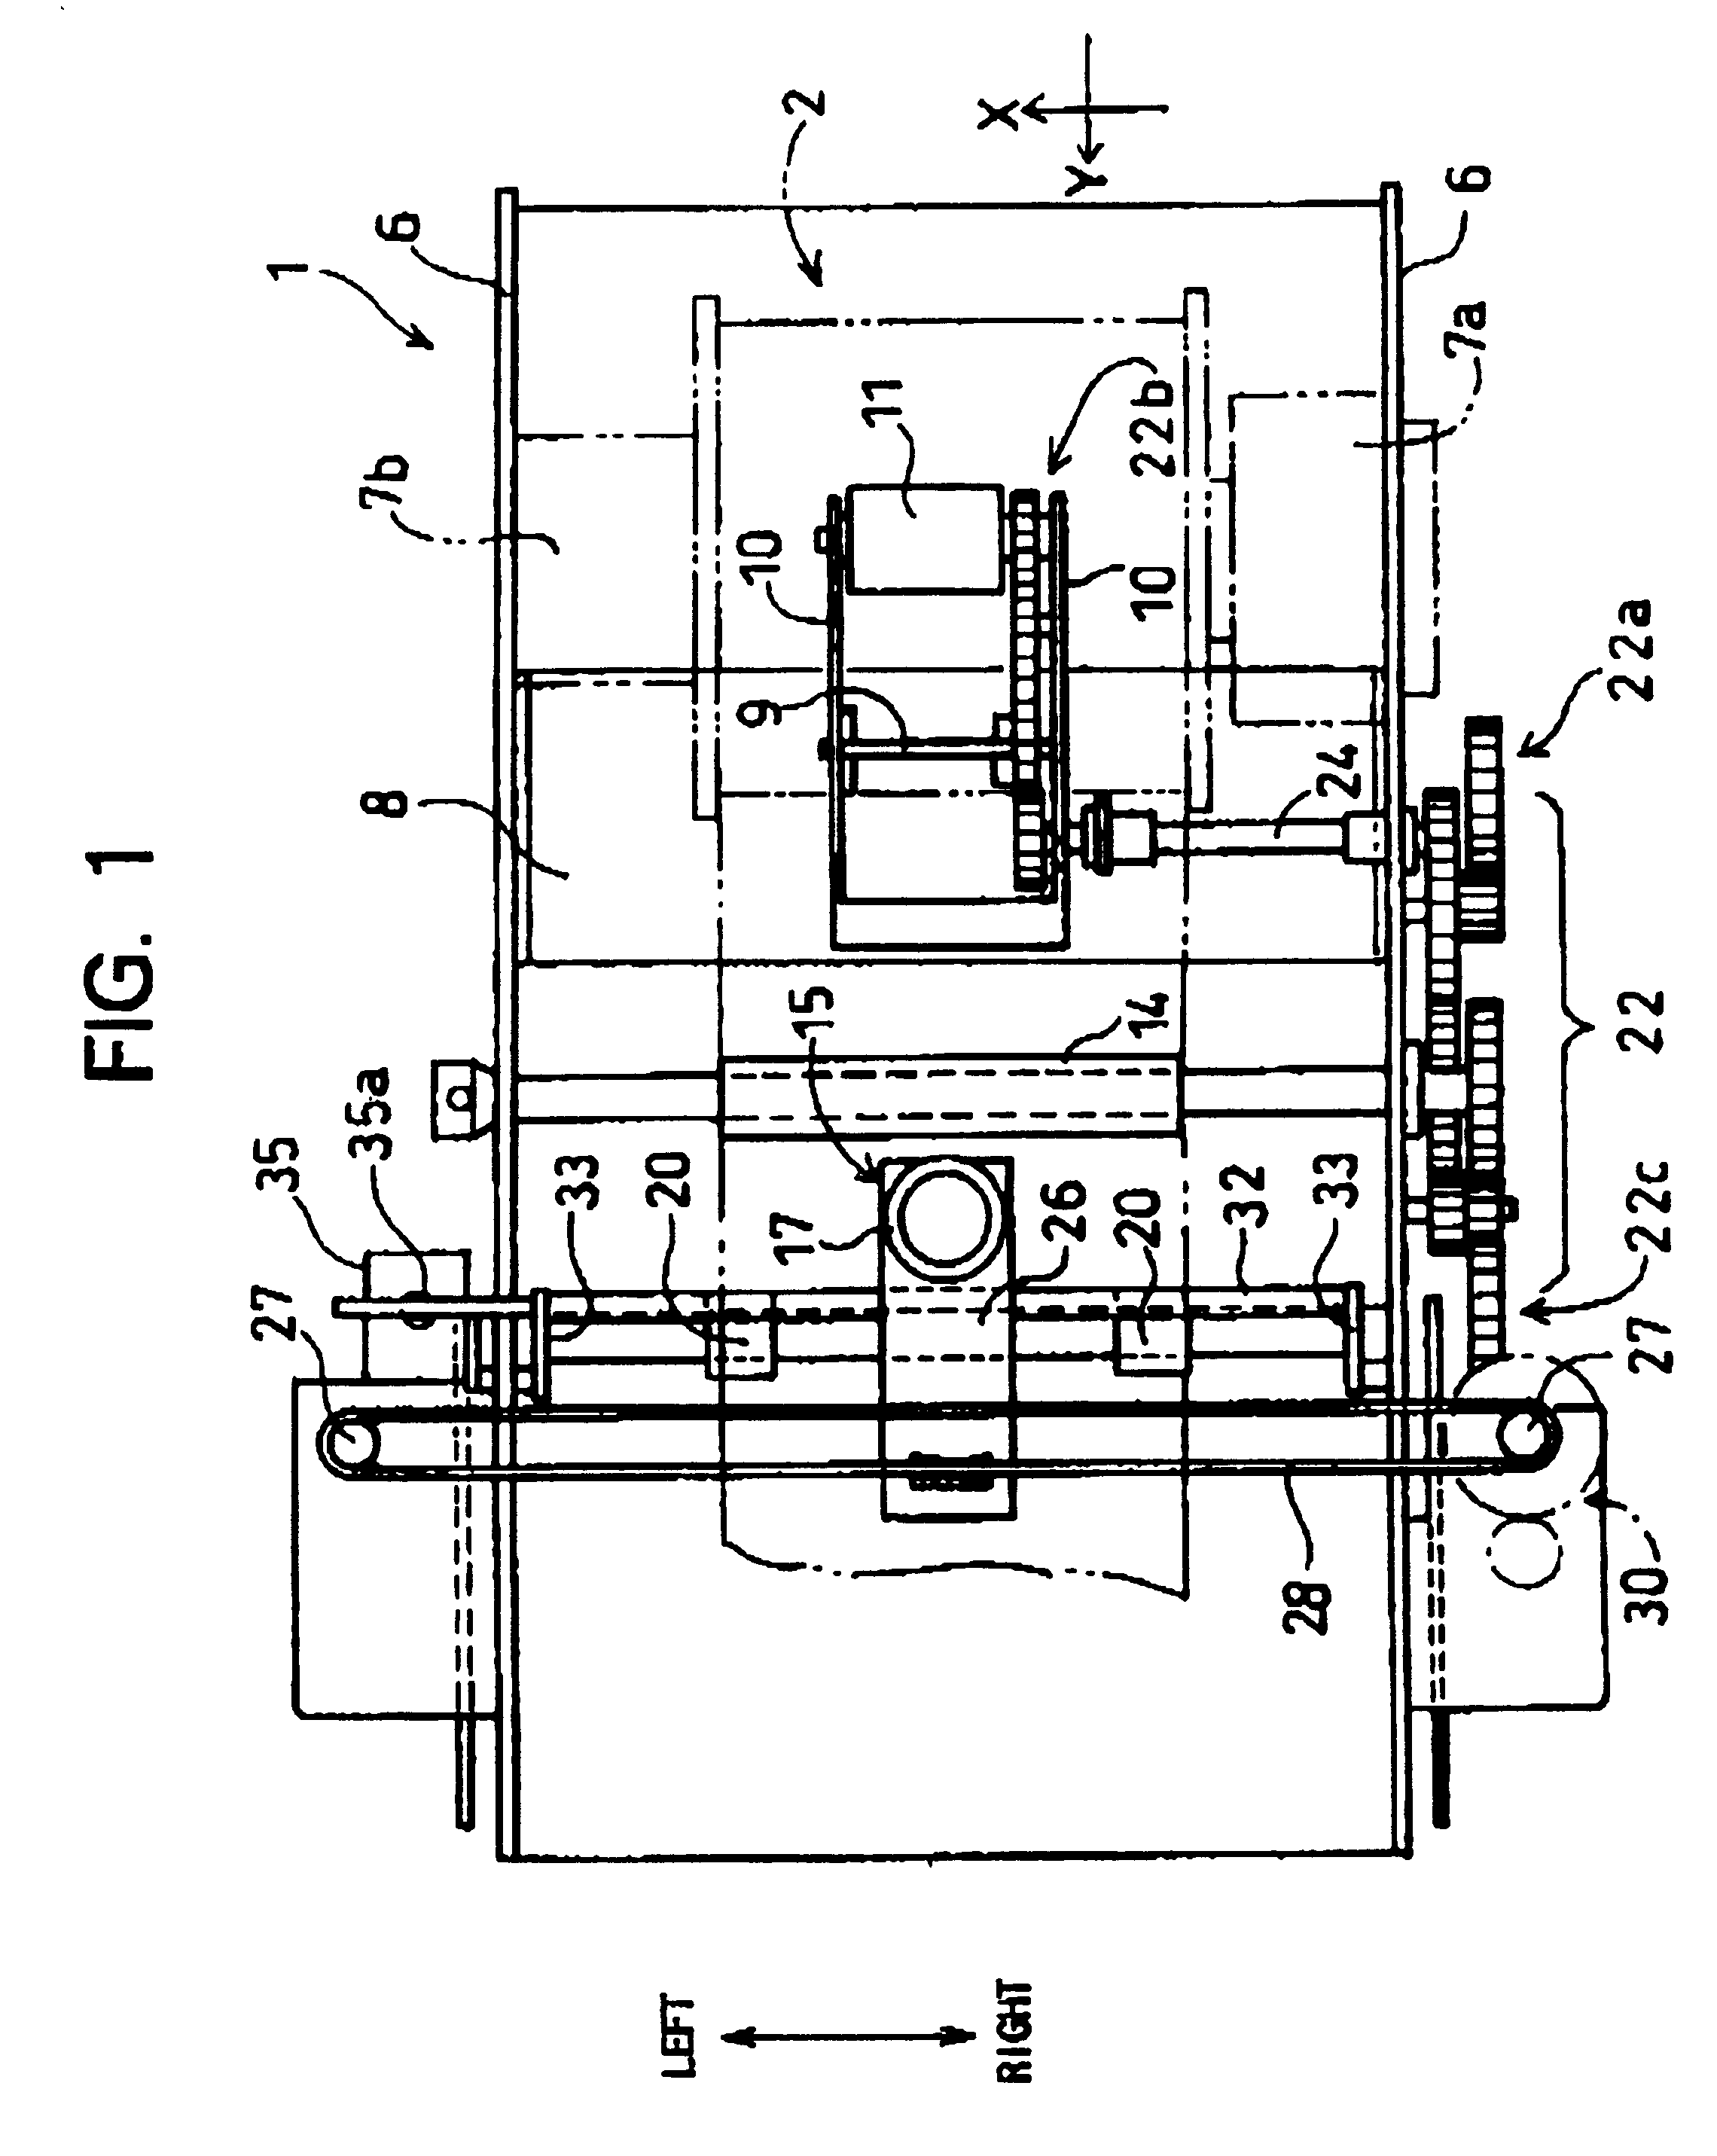 Device for adjusting distance of cutting blade from workpiece sheet